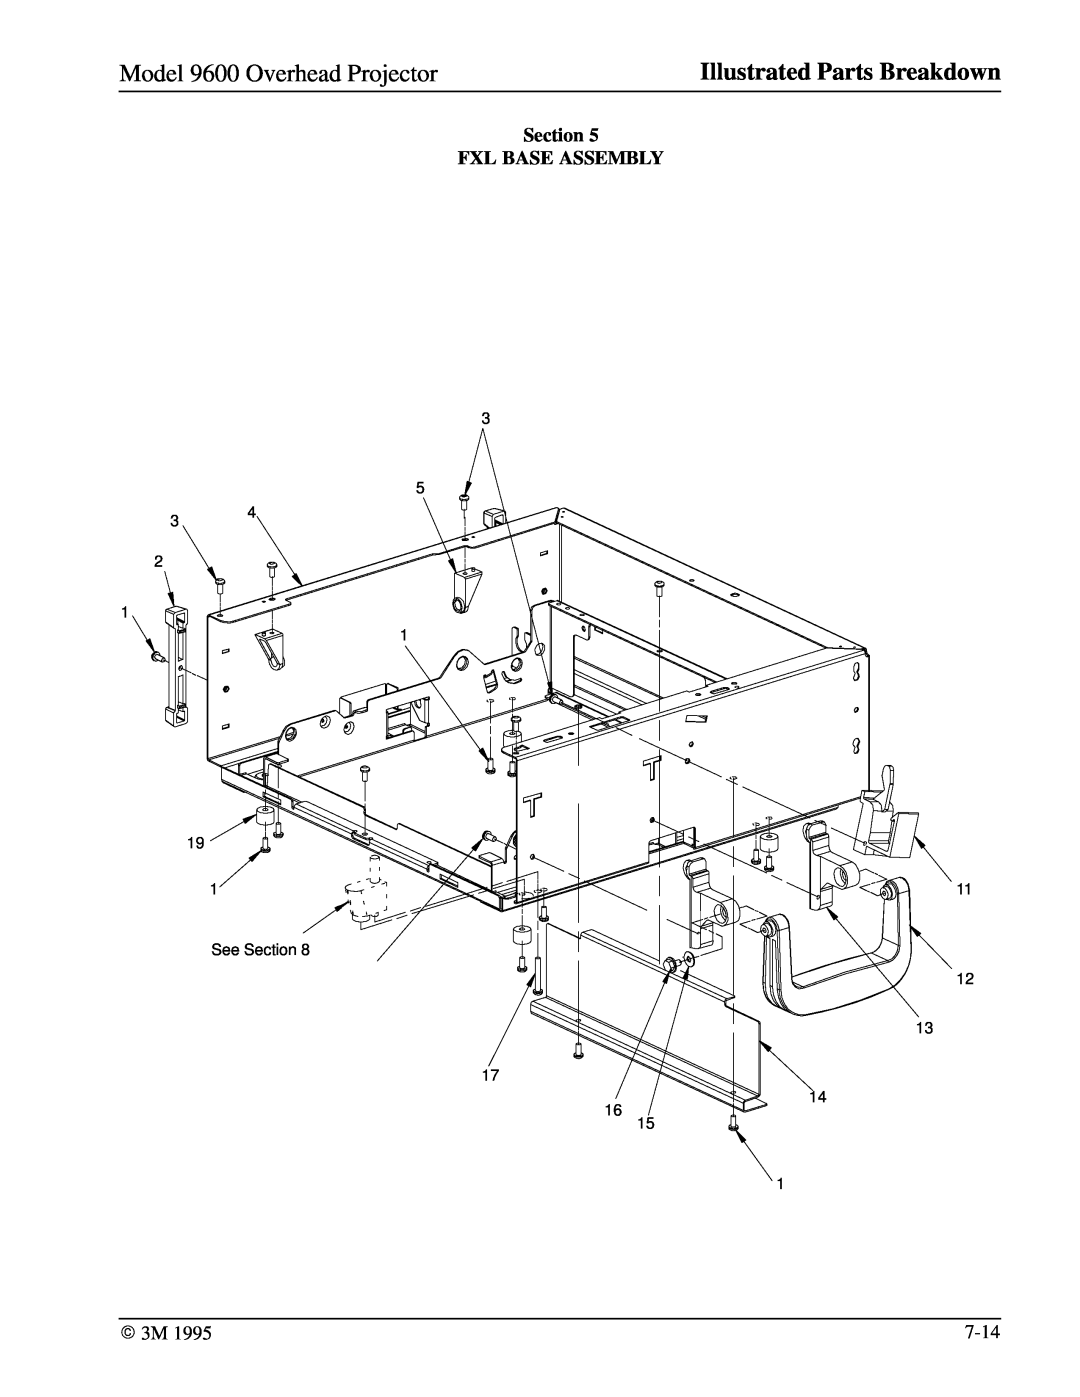 3M manual Section FXL BASE ASSEMBLY, Model 9600 Overhead Projector, Illustrated Parts Breakdown 